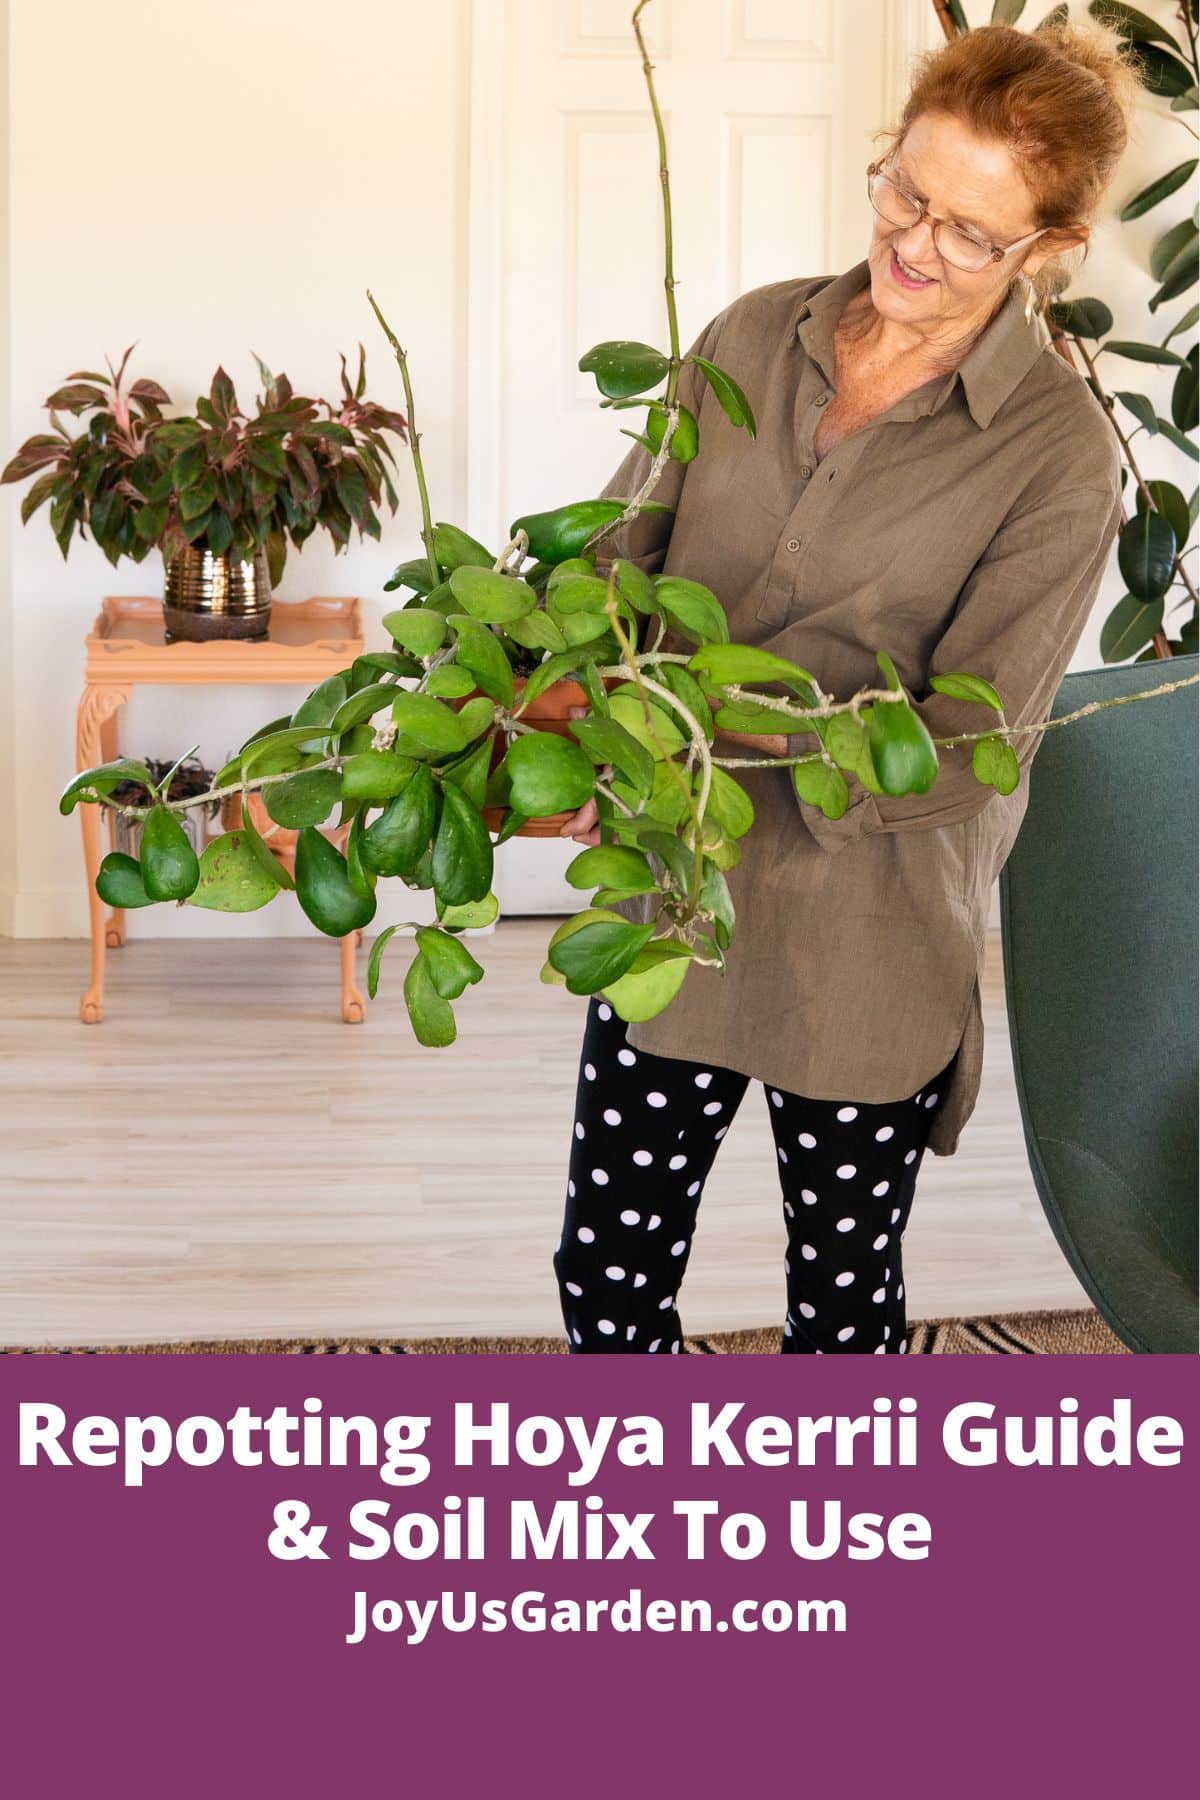  Repotting Hoya Kerrii Guide + The Soil Mix to use